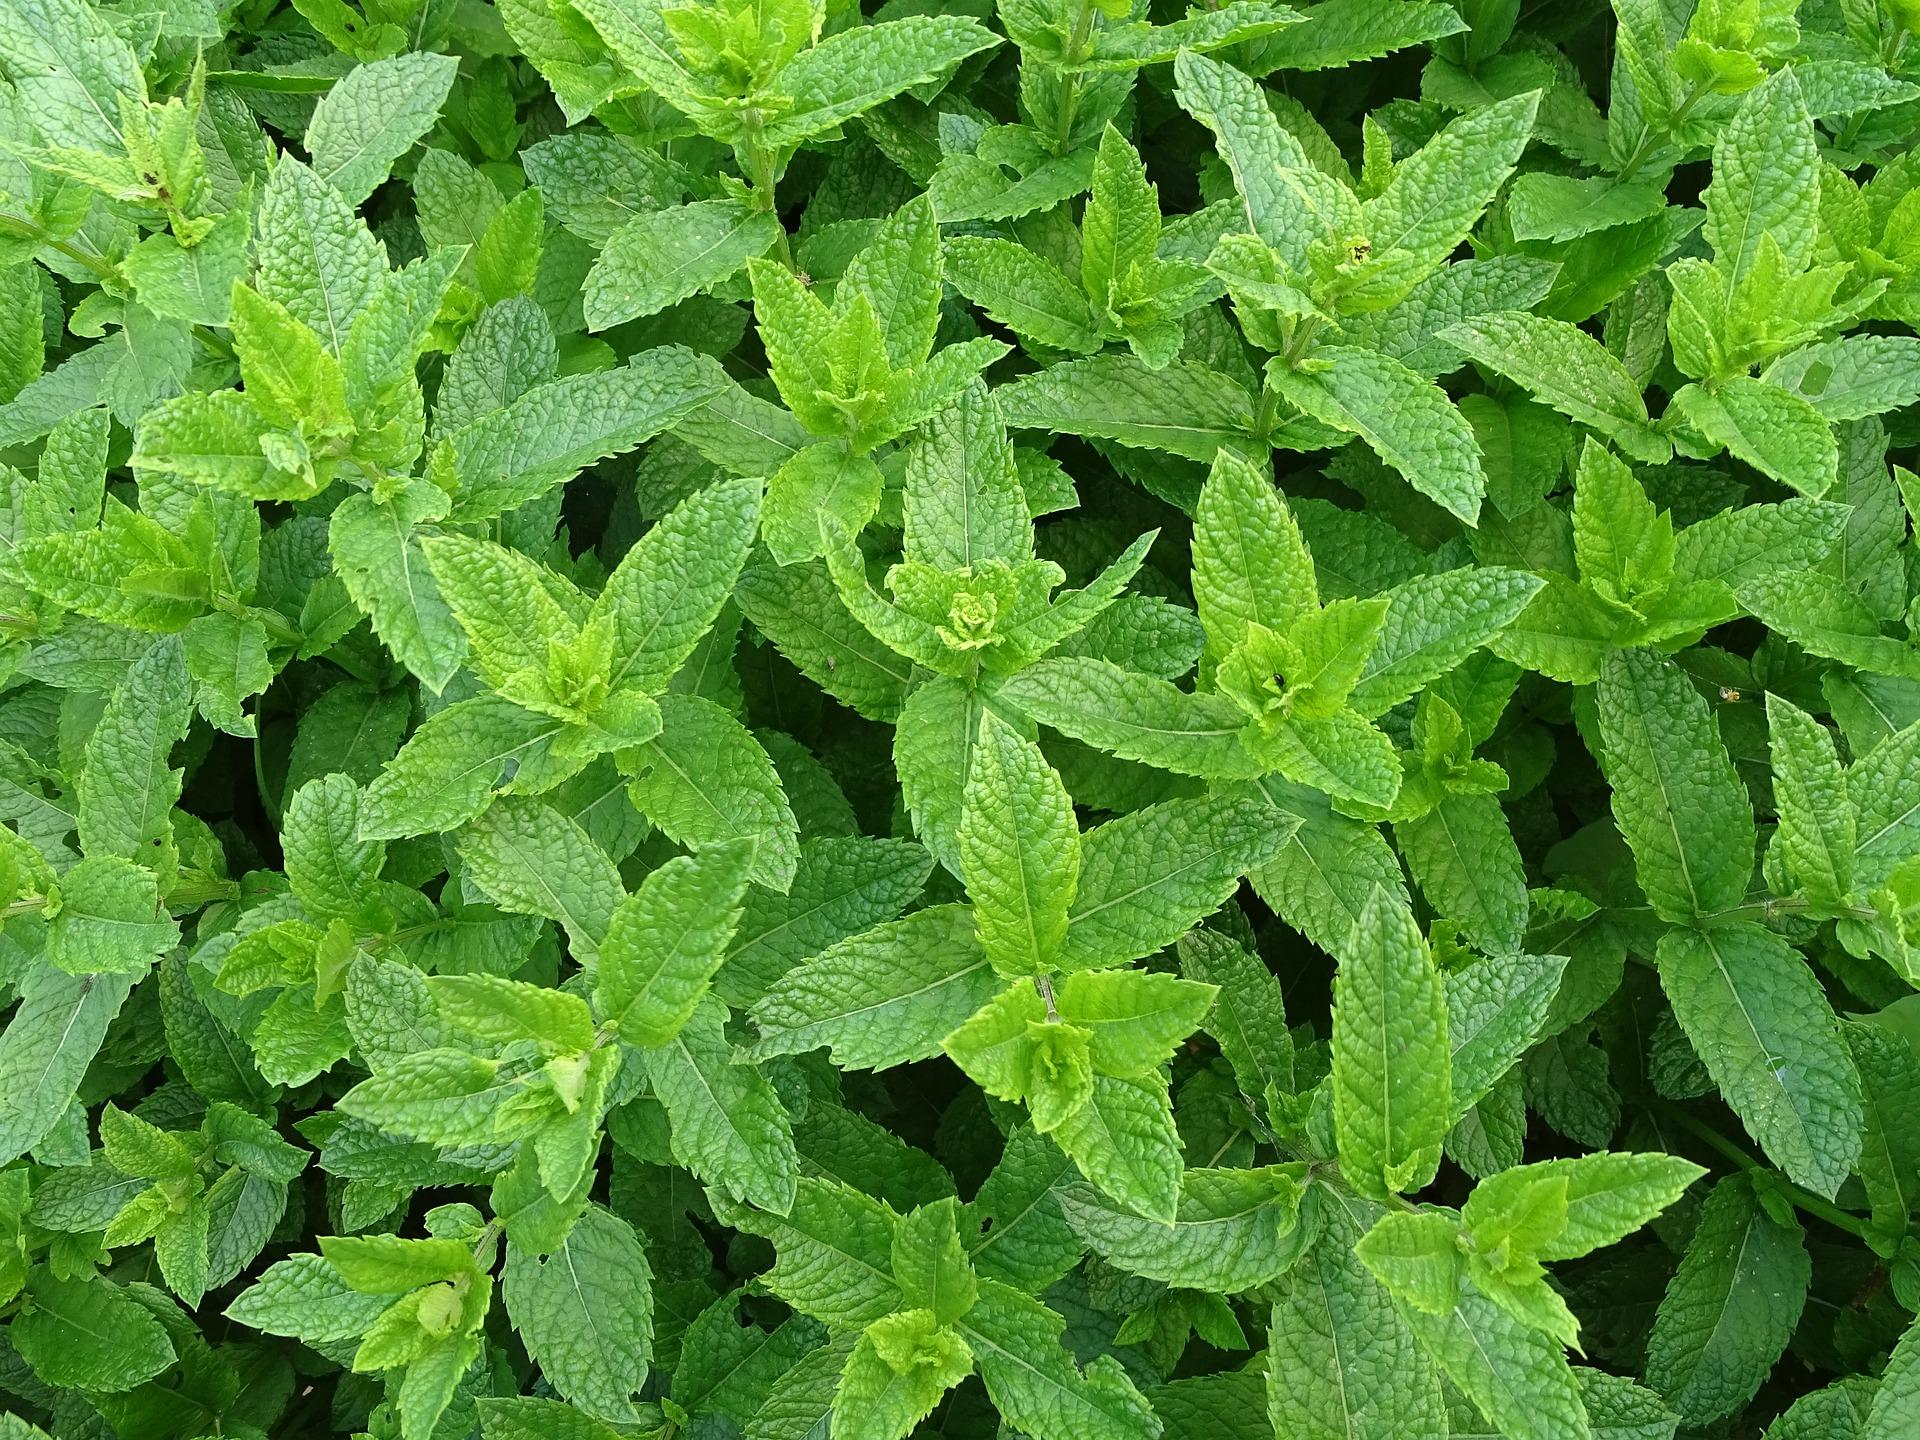 uploads/images/Moroccan Mint 2396530_1920